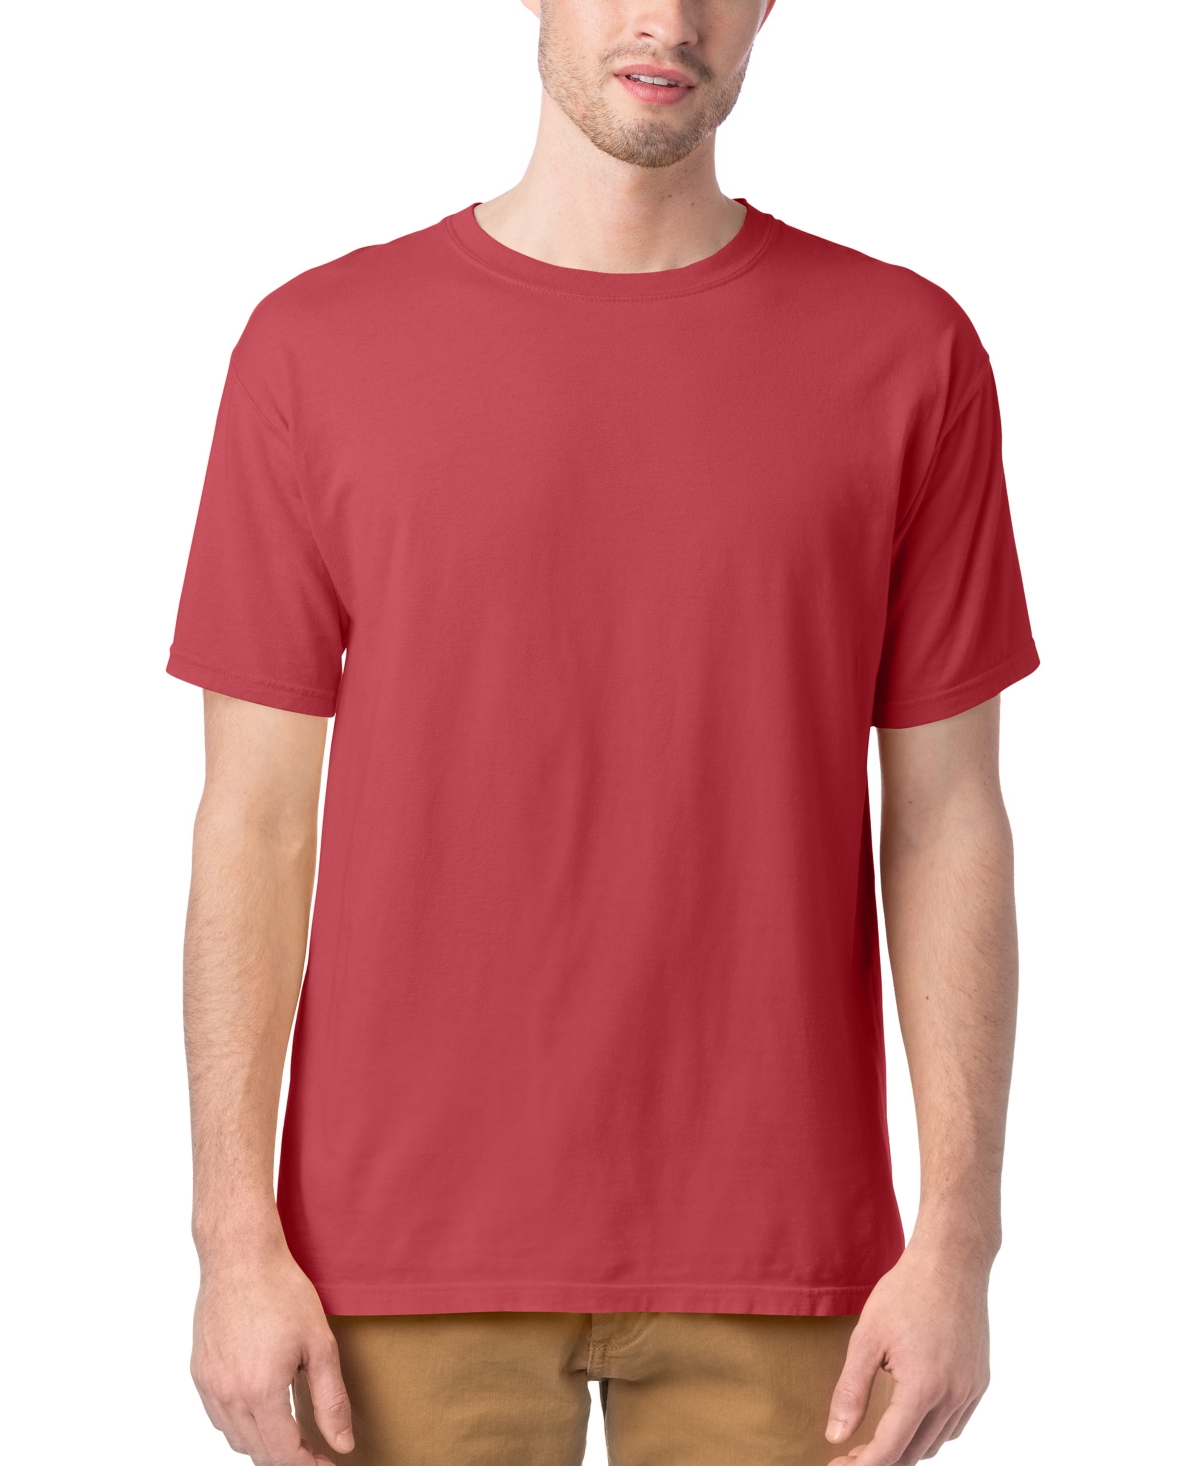 Hanes Unisex Garment Dyed Cotton T-shirt In Red